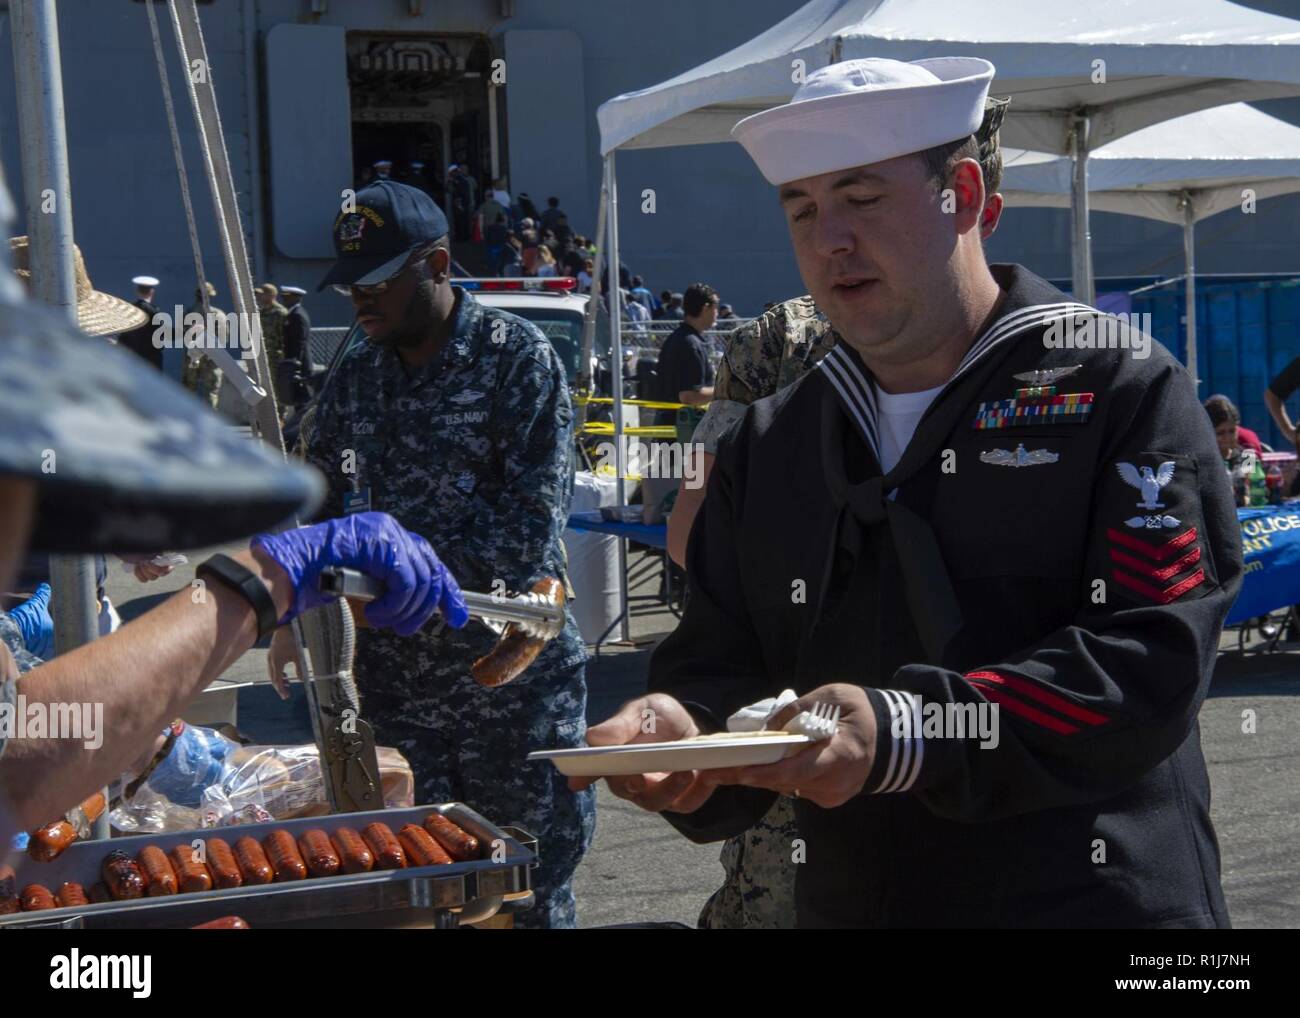 SAN FRANCISCO (Oct. 7, 2018) A member of the Navy League of Oakland serves a meal to Aviation Boatswain’s Mate (Fuel) 1st Class Timothy Giffin, from Reno, Nev., assigned to the amphibious assault ship USS Bonhomme Richard (LHD 6), during a barbeque for the crew event during San Francisco Fleet Week 2018. San Francisco Fleet Week is an opportunity for the American public to meet their Navy, Marine Corps and Coast Guard teams and experience America’s sea services. During fleet week, service members participate in various community service events, showcase capabilities and equipment to the commun Stock Photo